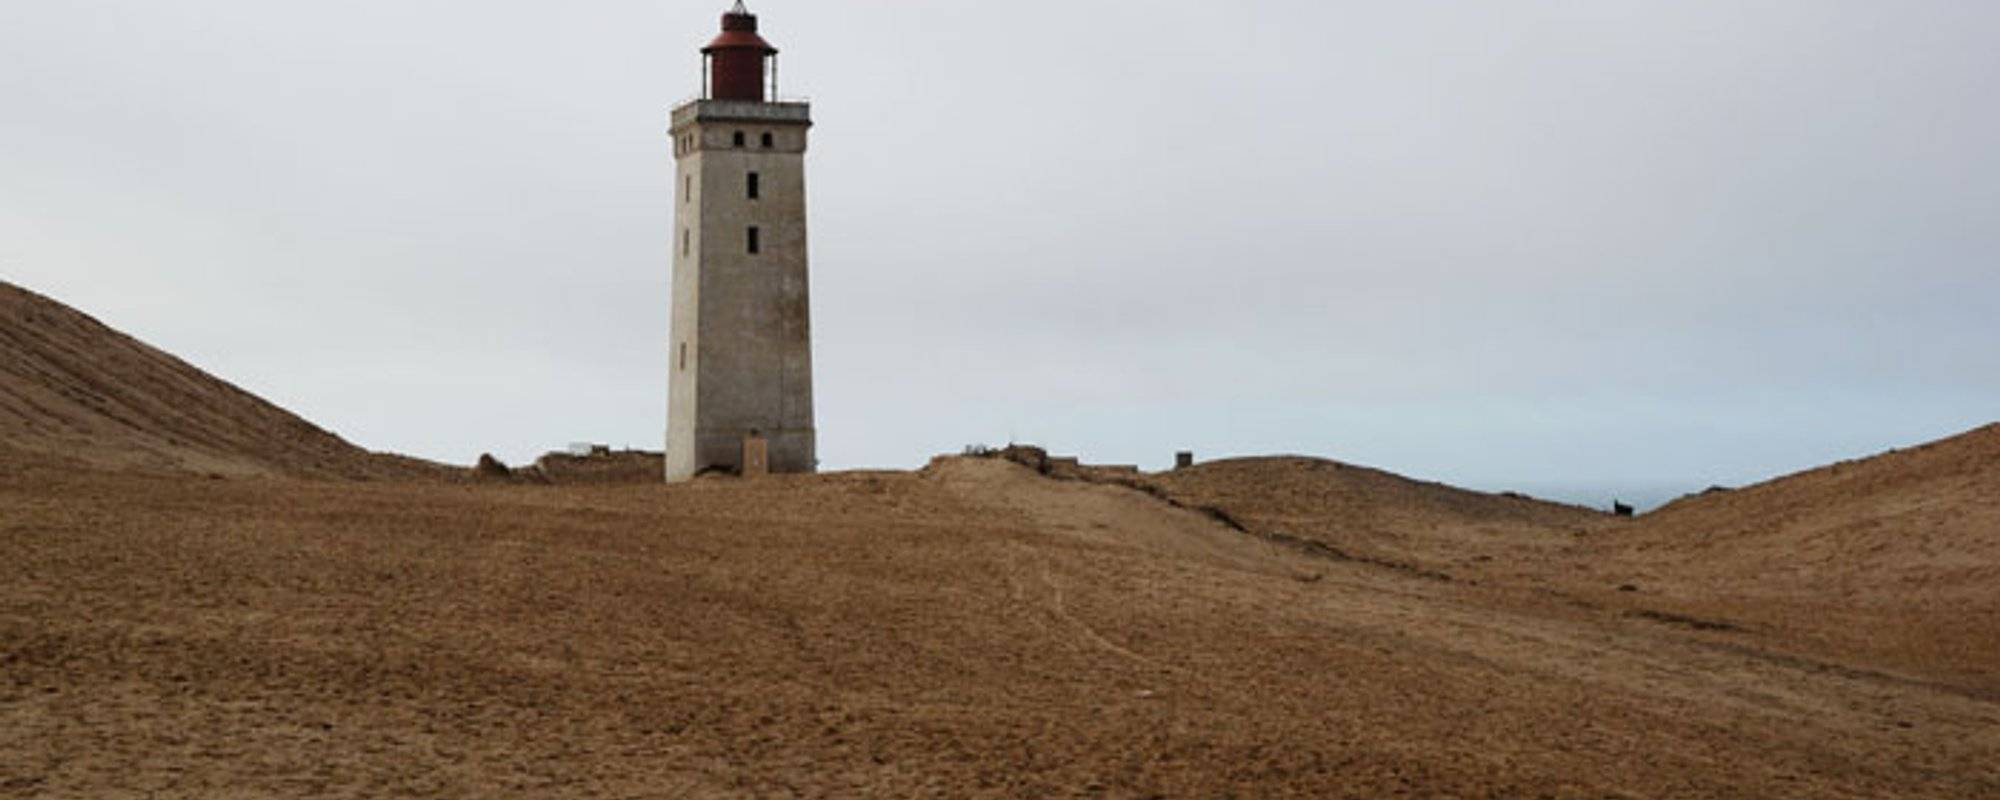 Denmark – A lighthouse standing on the edge, waiting to slip into the sea